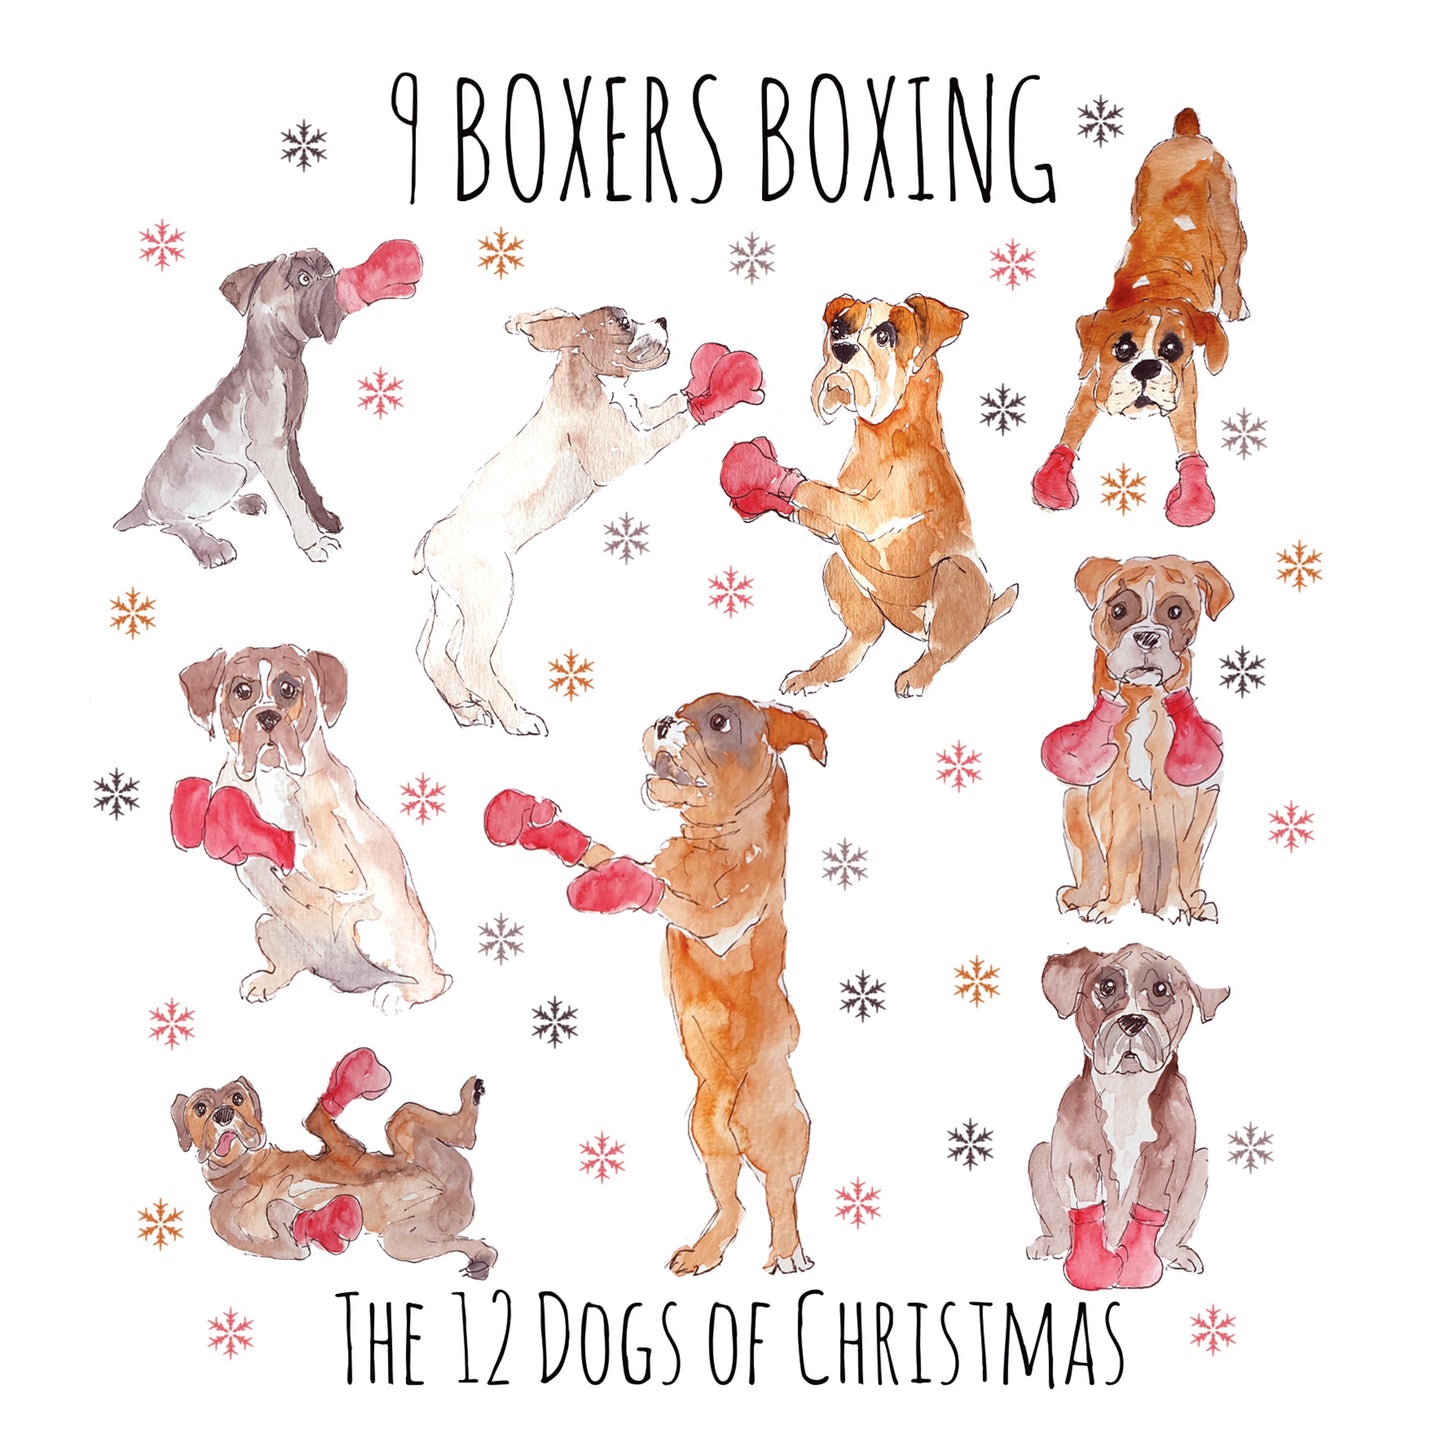 9 Boxers Boxing - Greeting Card